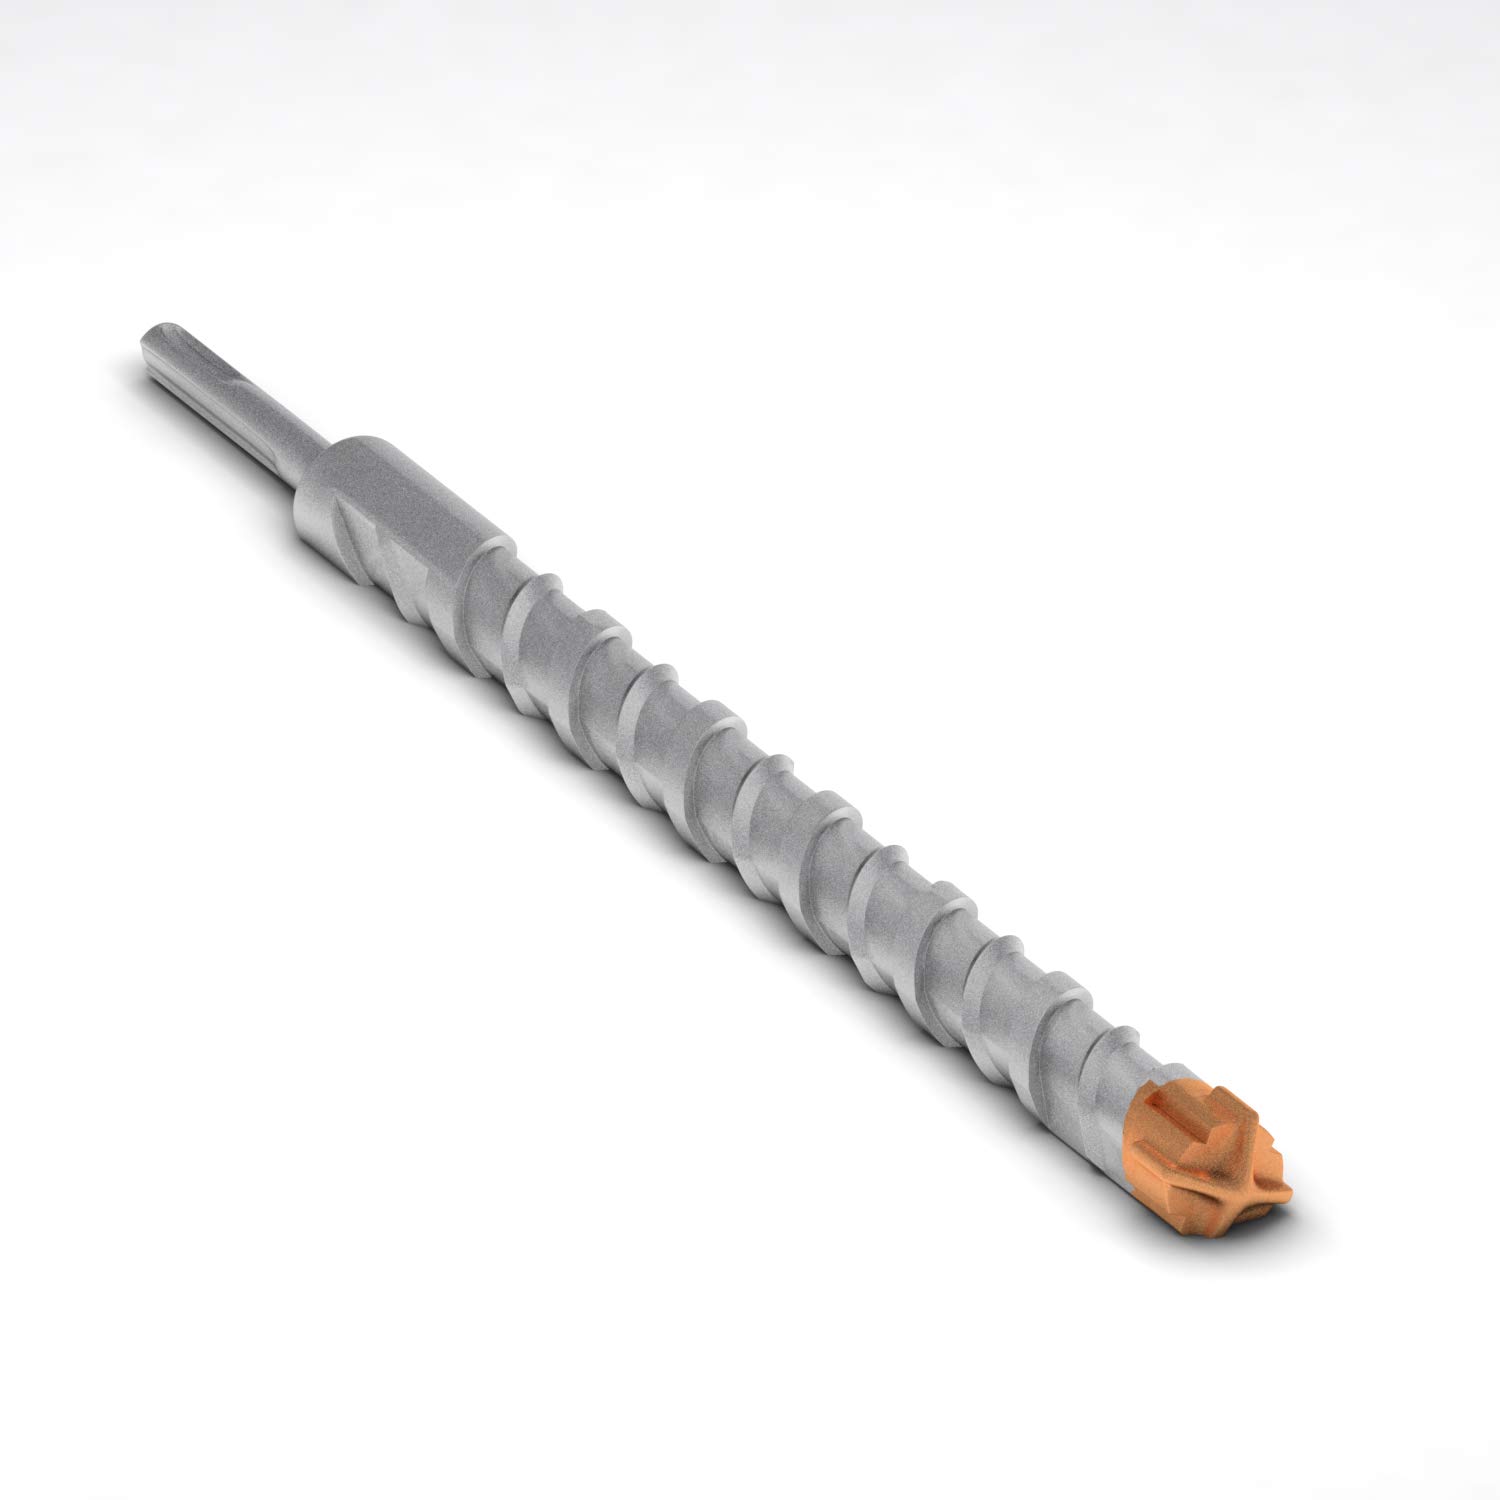 E&K 1-3/8’’ Inch SDS Plus Rotary Hammer Drill Bit for [...]